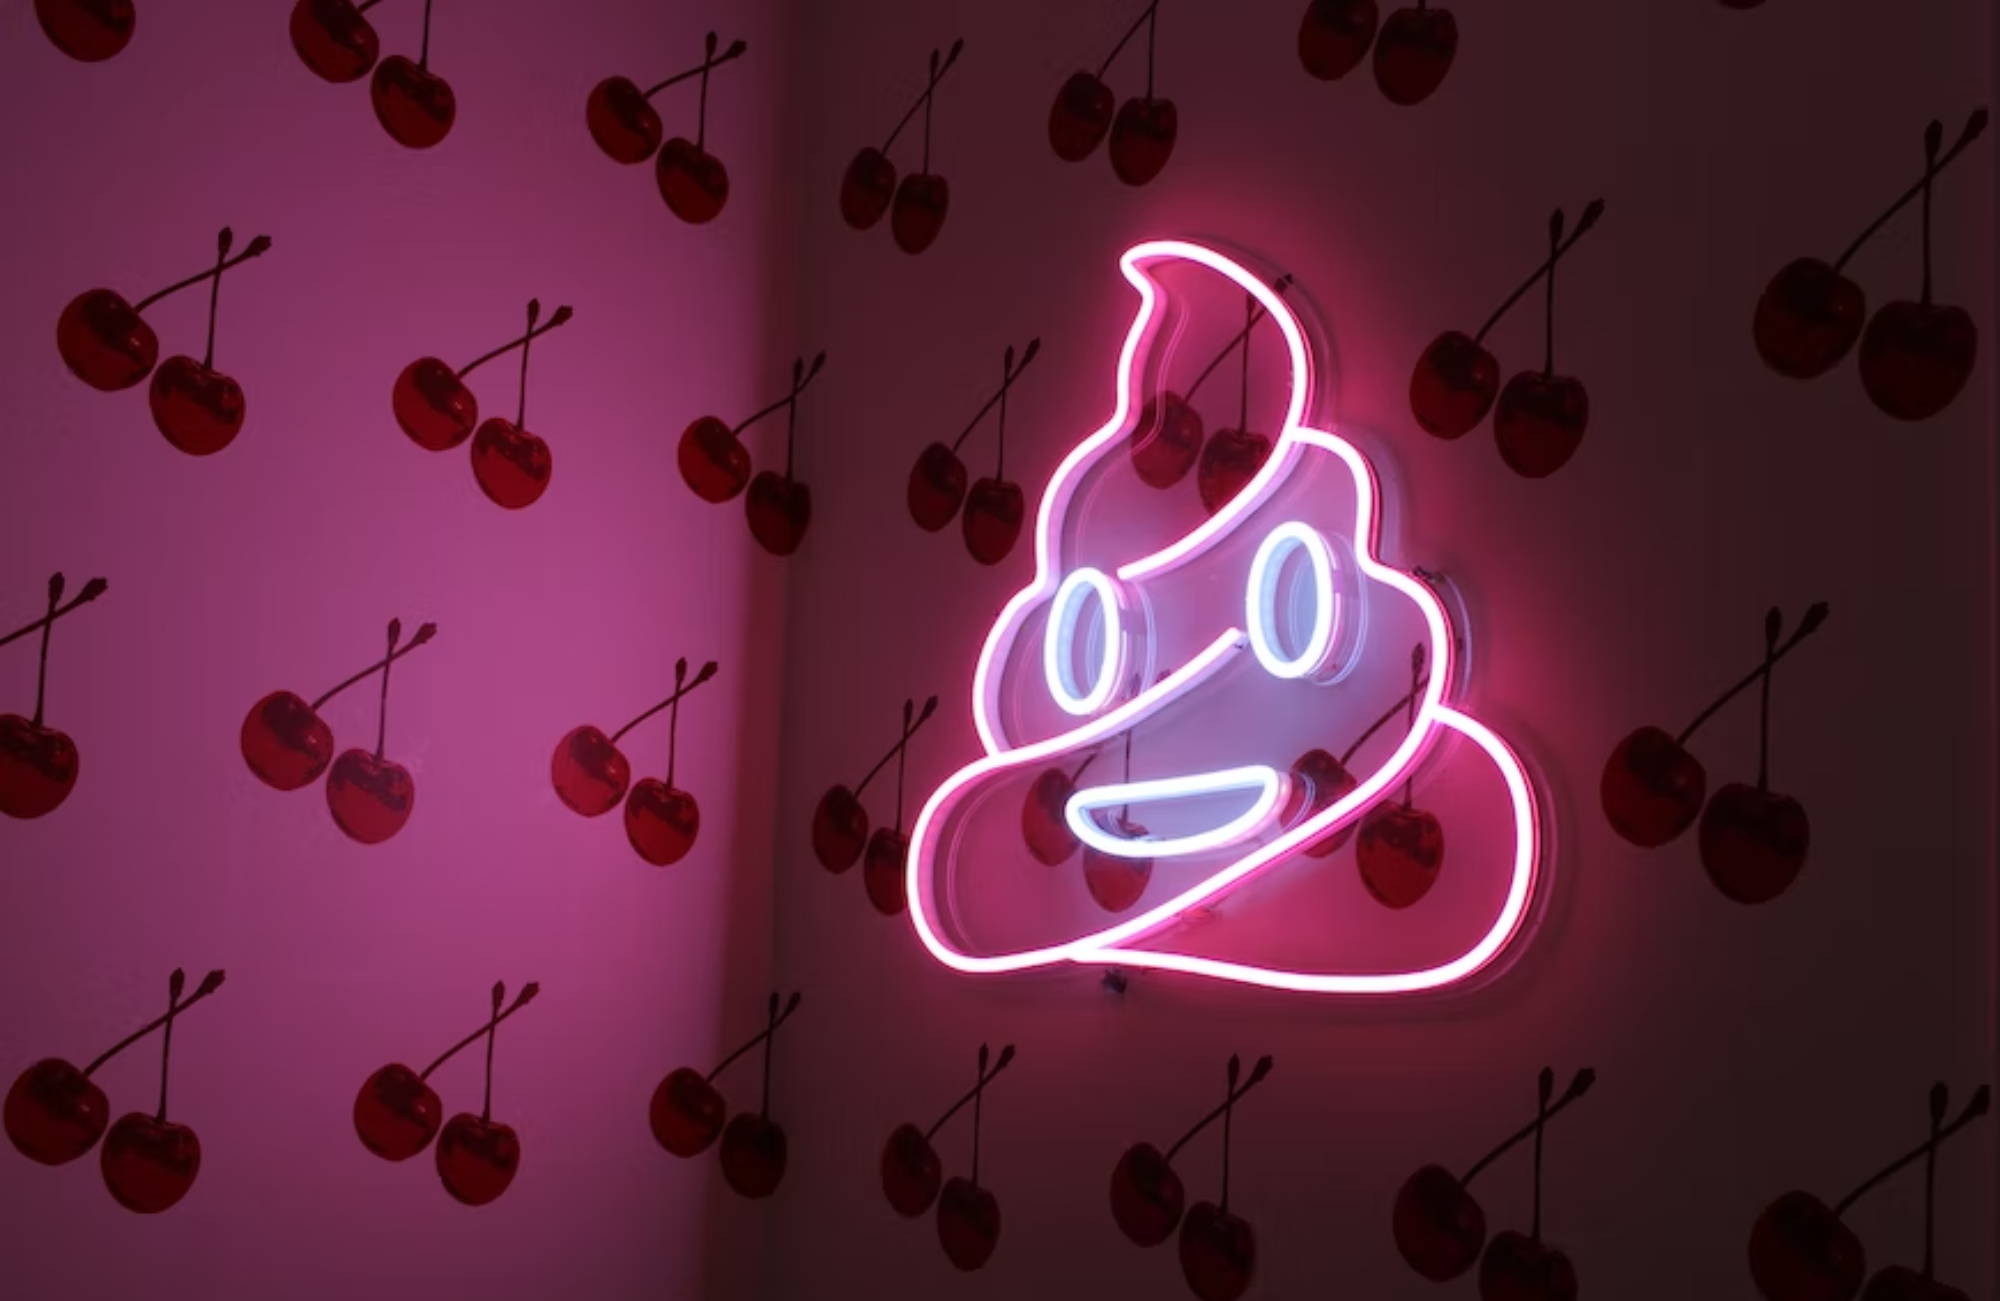 A neon pink poop emoji sign hanging on a wall with pink, cherry-print wallpaper.